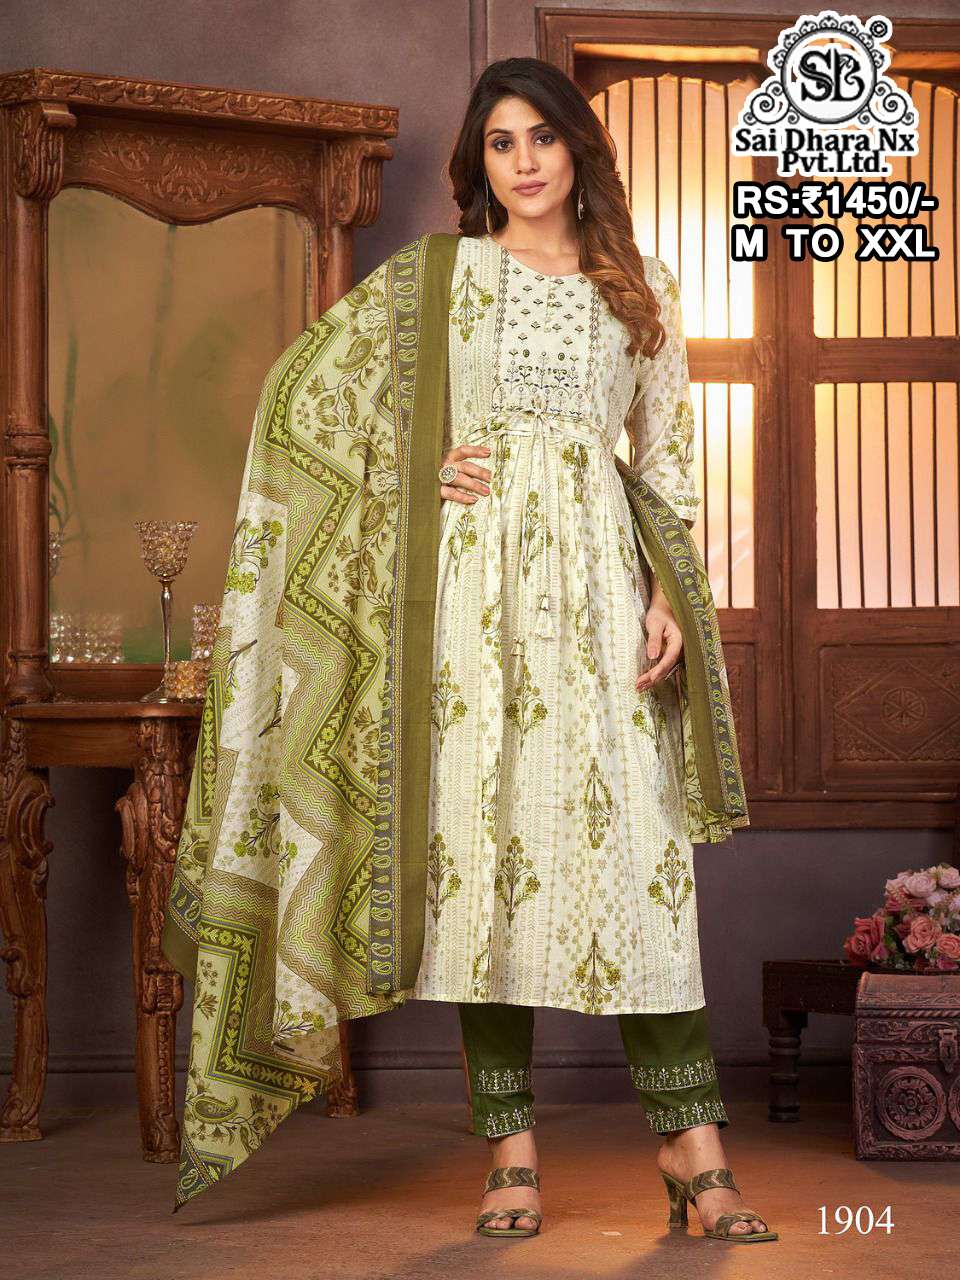 SAIDHARANX PRESENT D.NO 1904 READY TO WEAR DESIGNER 3 PIECE CONCEPT COMBO COLLECTION IN WHOLESALE RATE IN SURAT